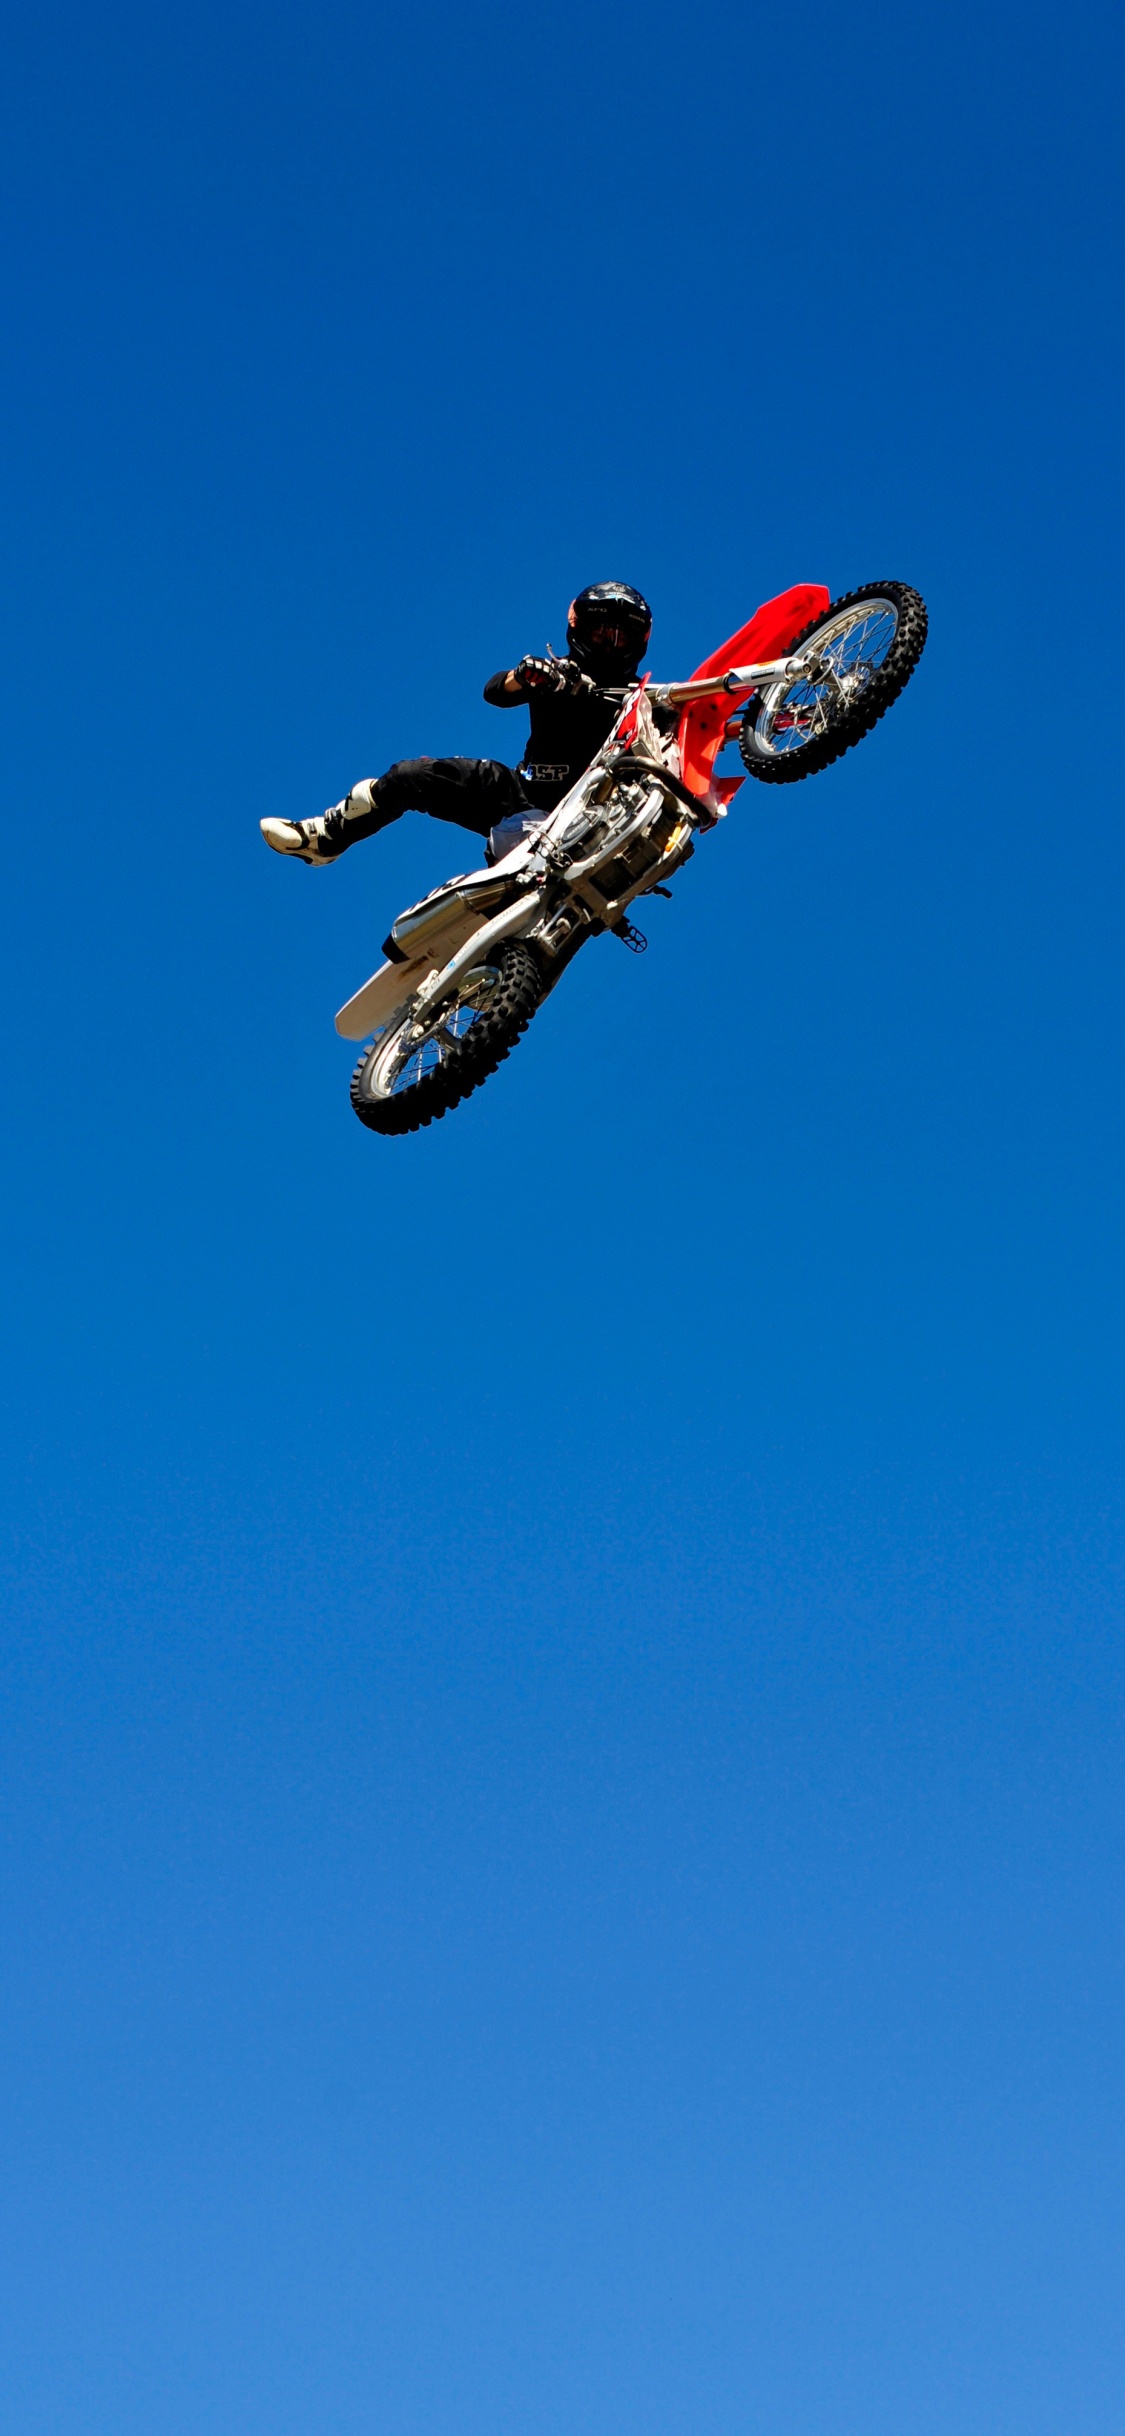 Man in Red and Black Motocross Suit Riding Red and White Motocross Dirt Bike. Wallpaper in 1125x2436 Resolution